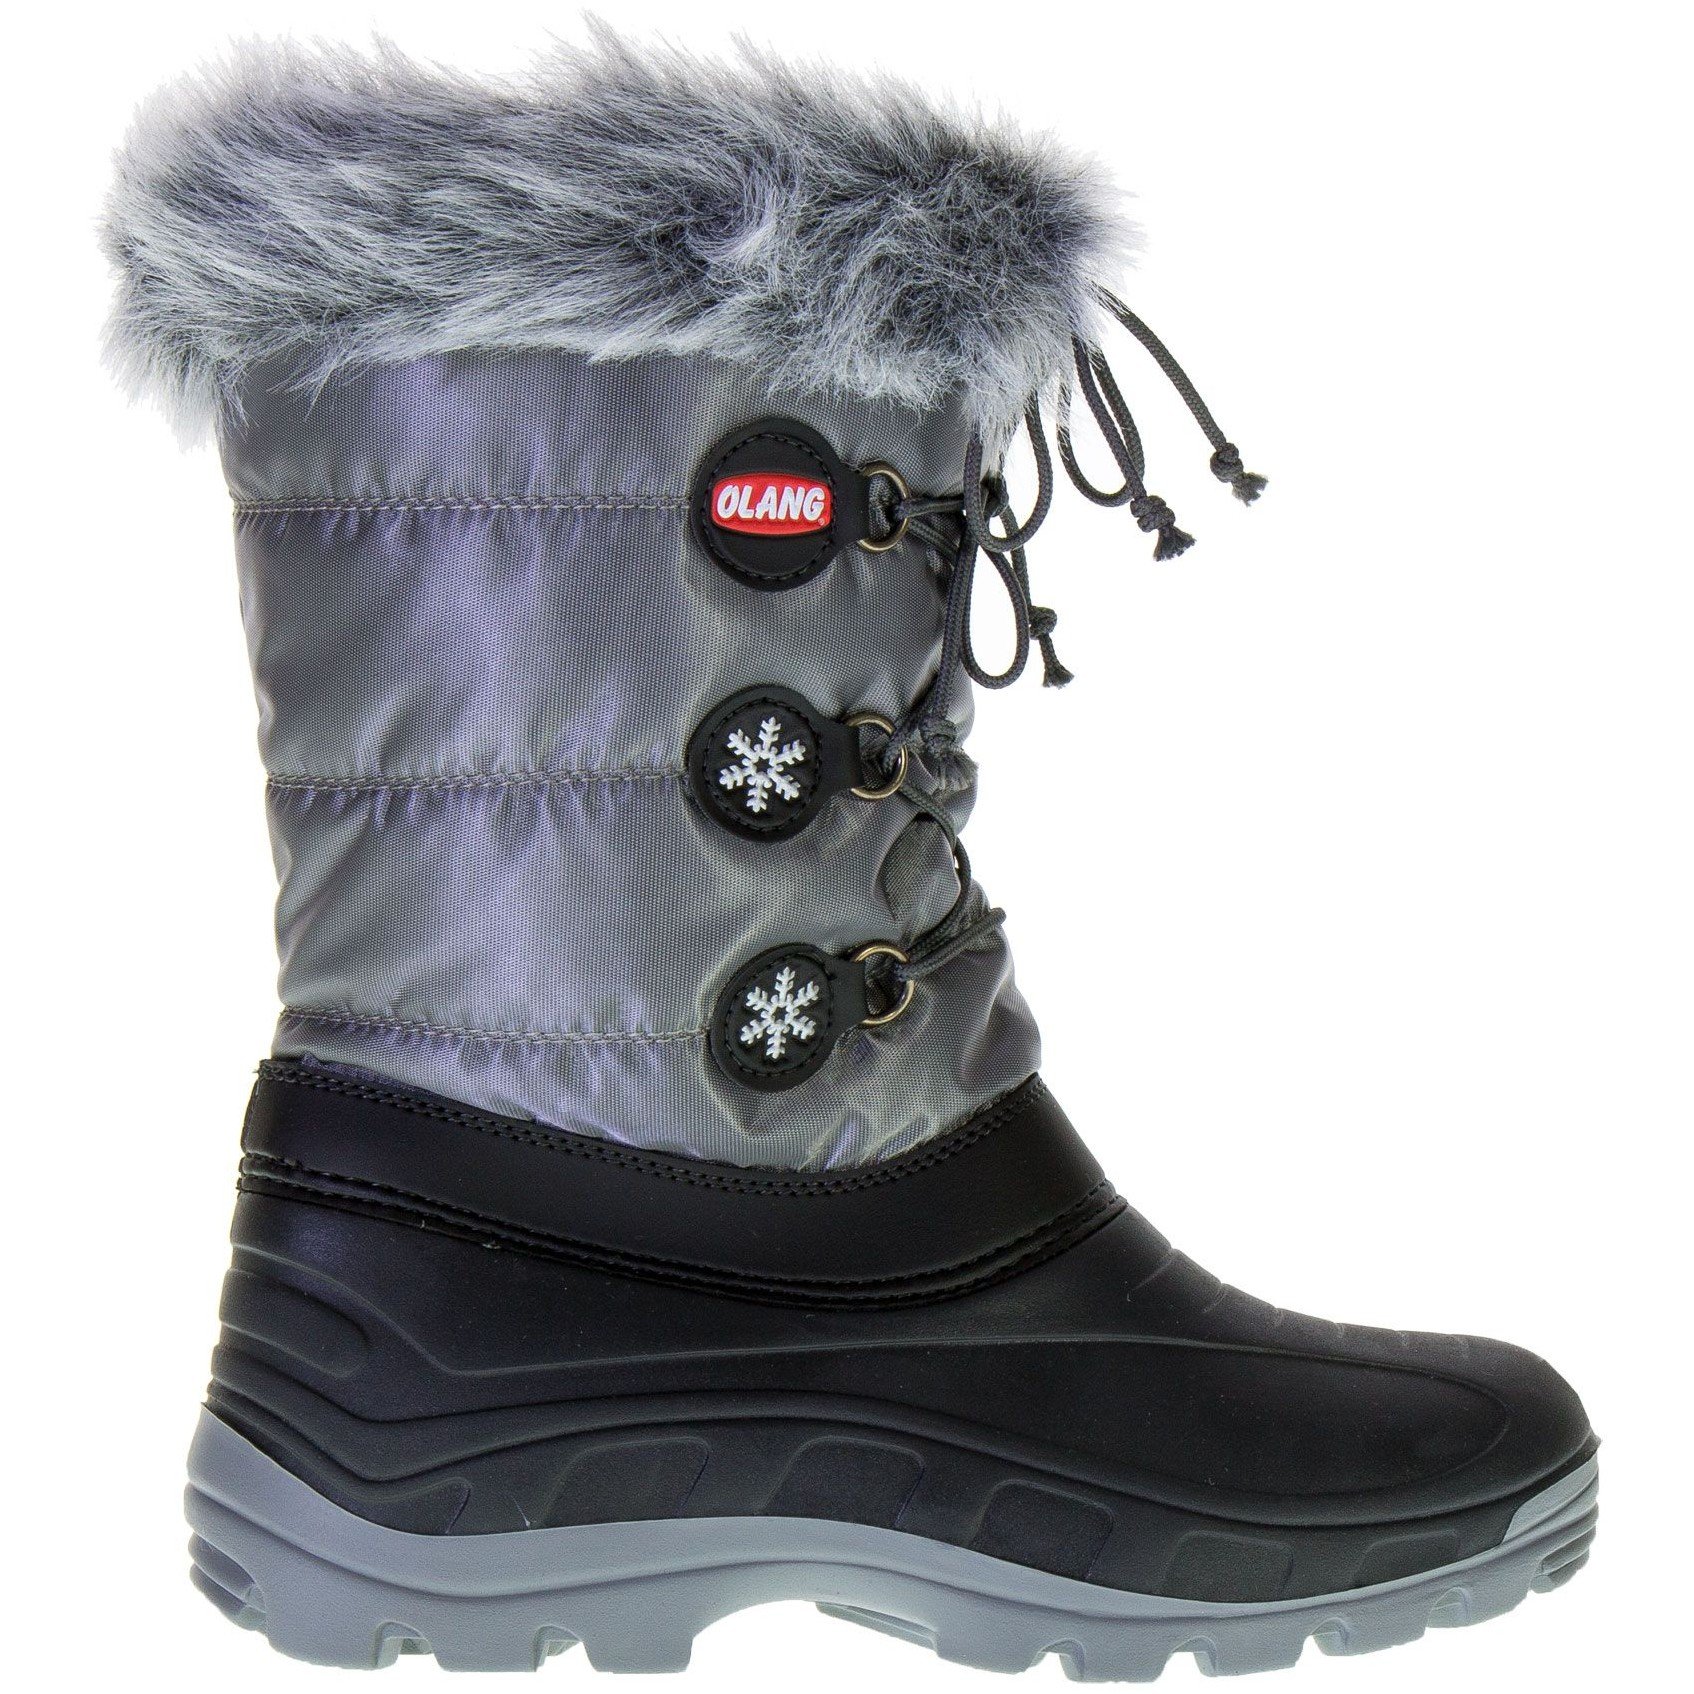 Olang Patty Women's Winter Snow Boots